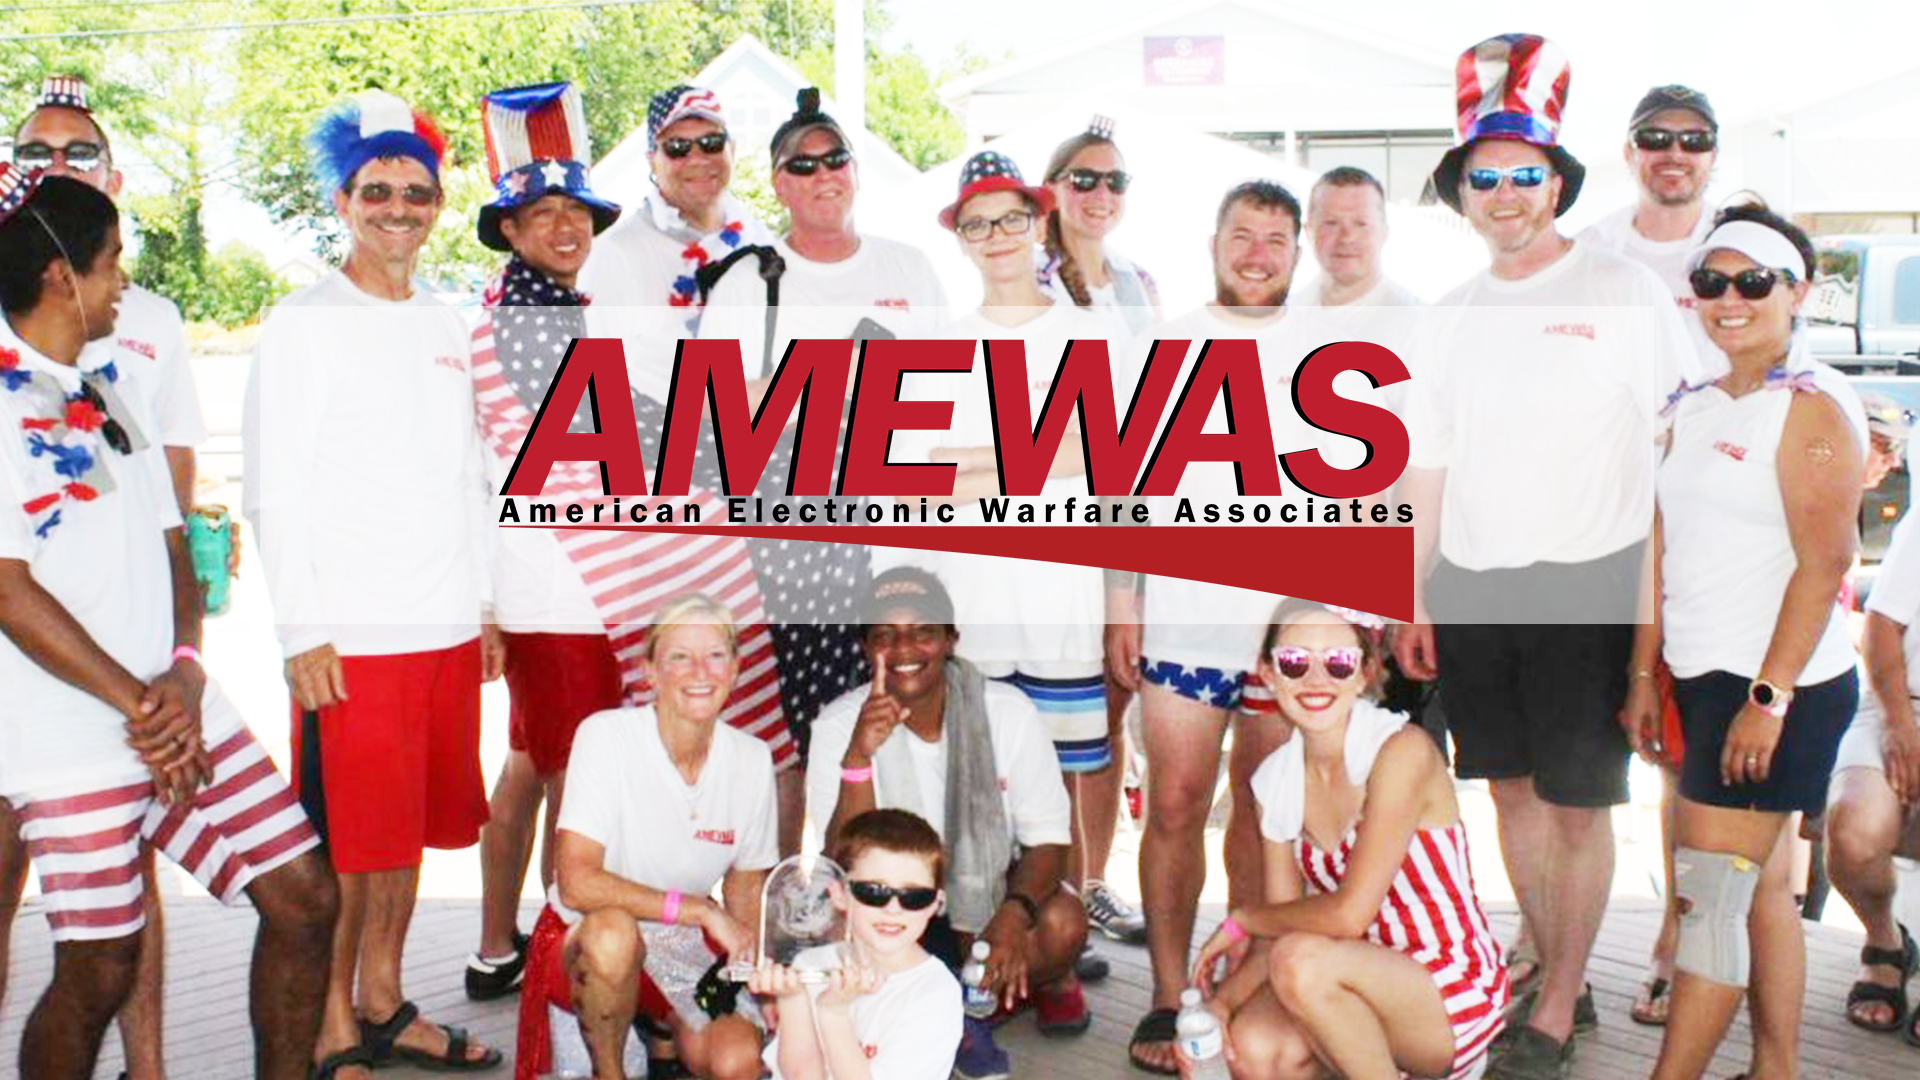 AMEWAS team in red white and blue